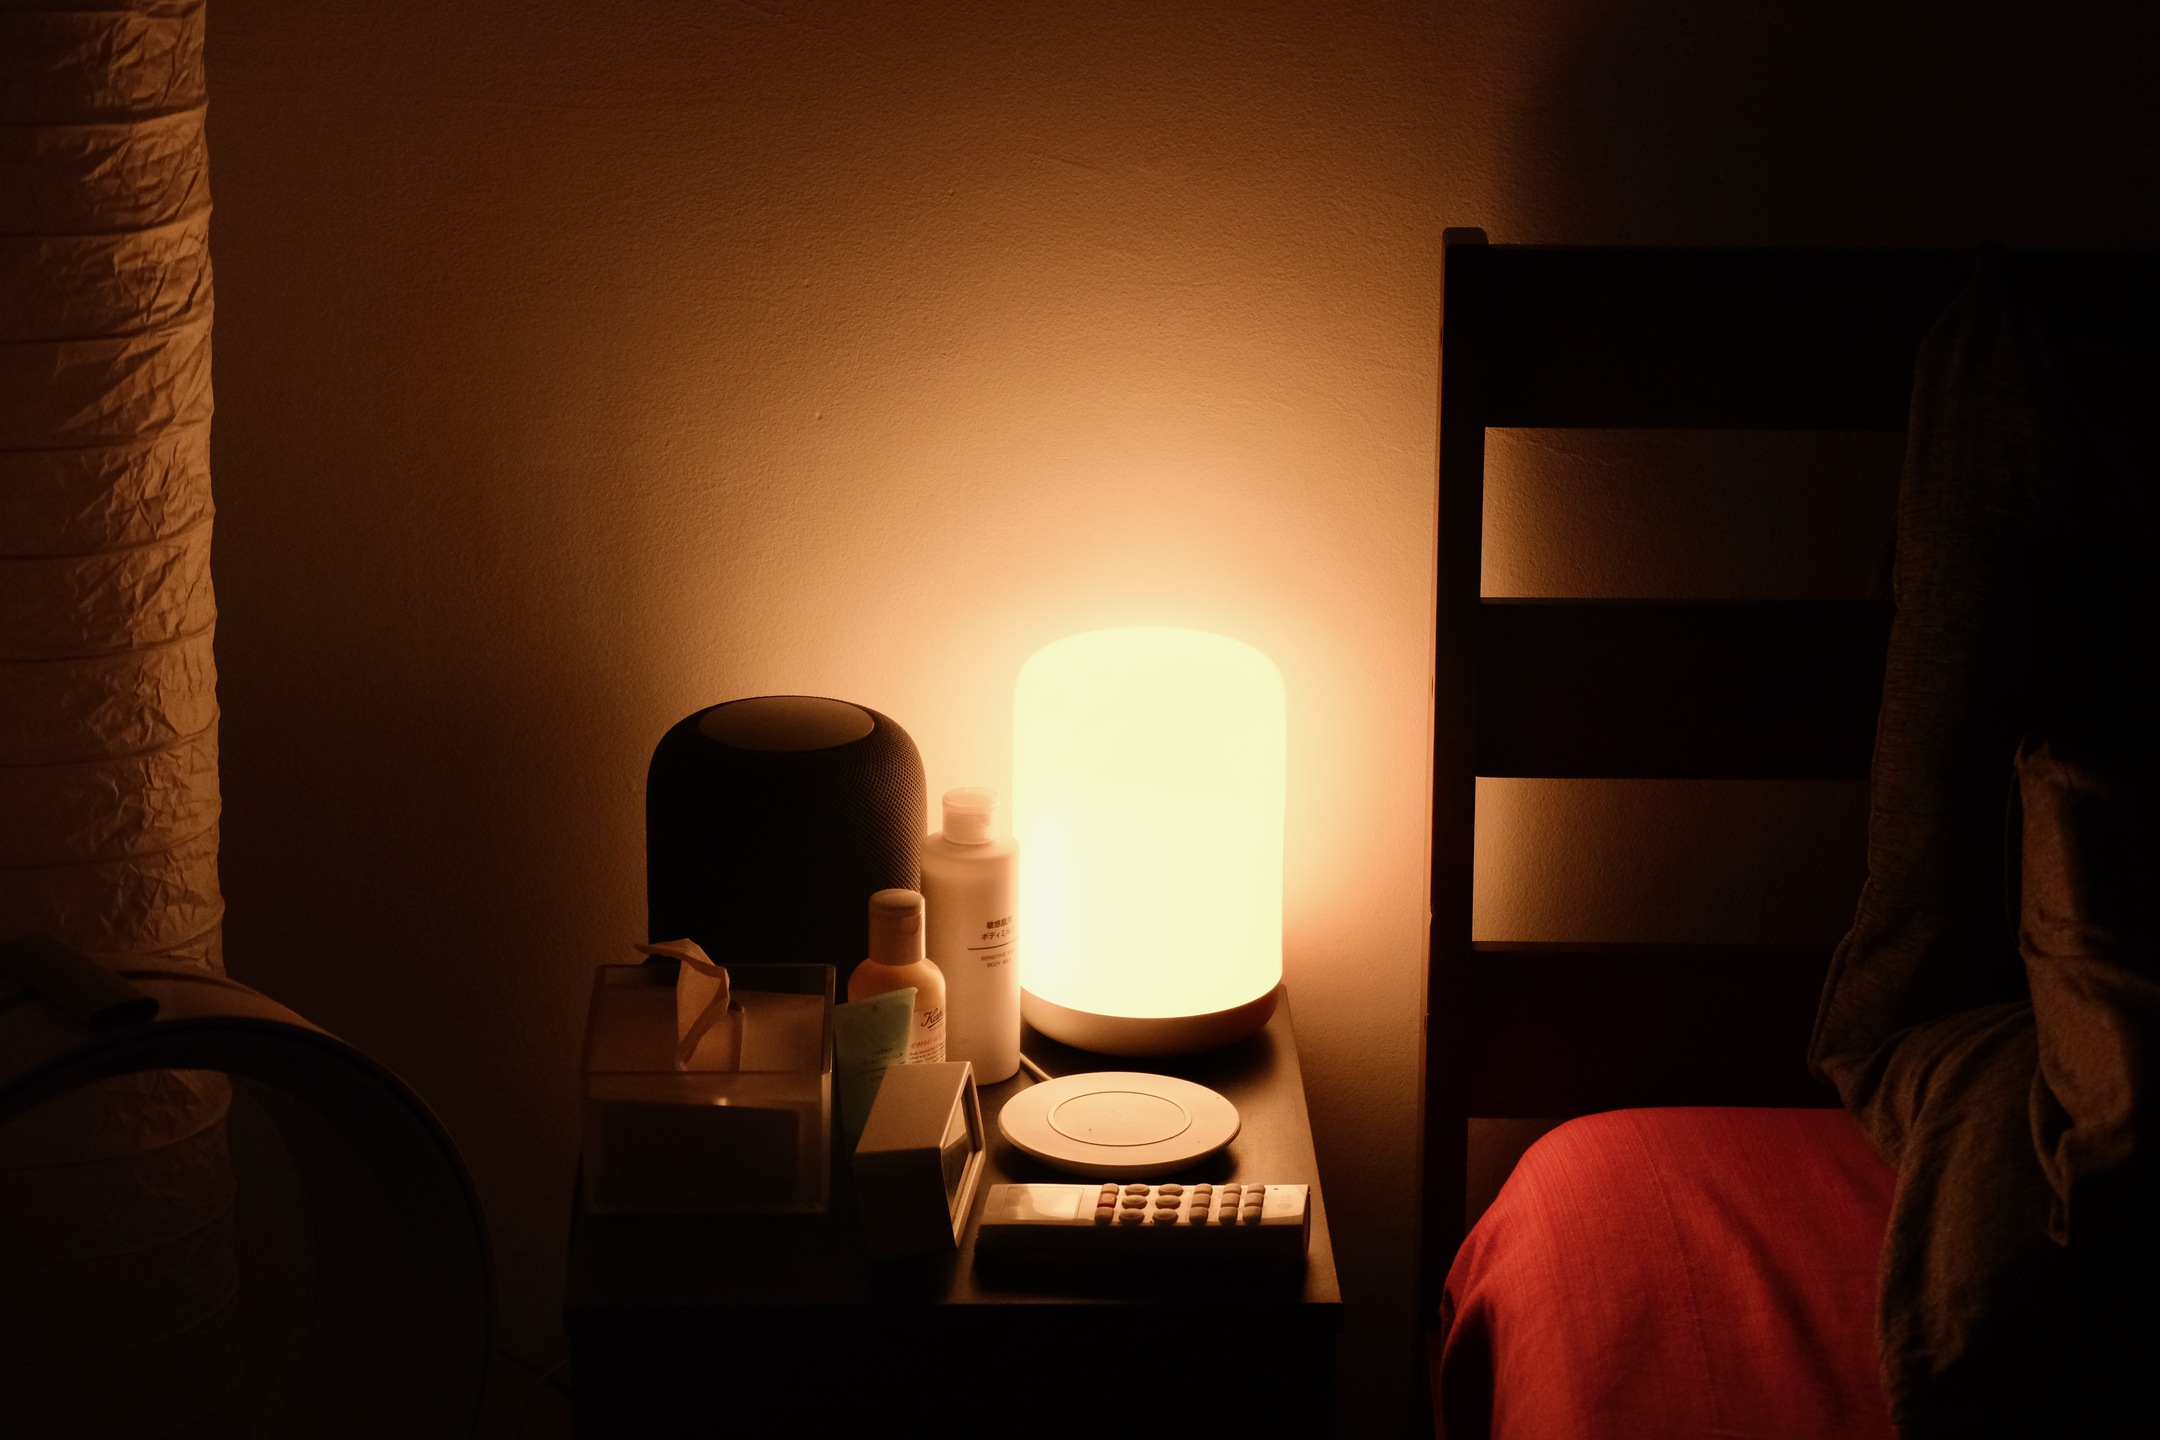 A bedside table with a warm light source, a speaker, some bottles of lotion, tissues, a clock, a remote, and a white wireless charger.